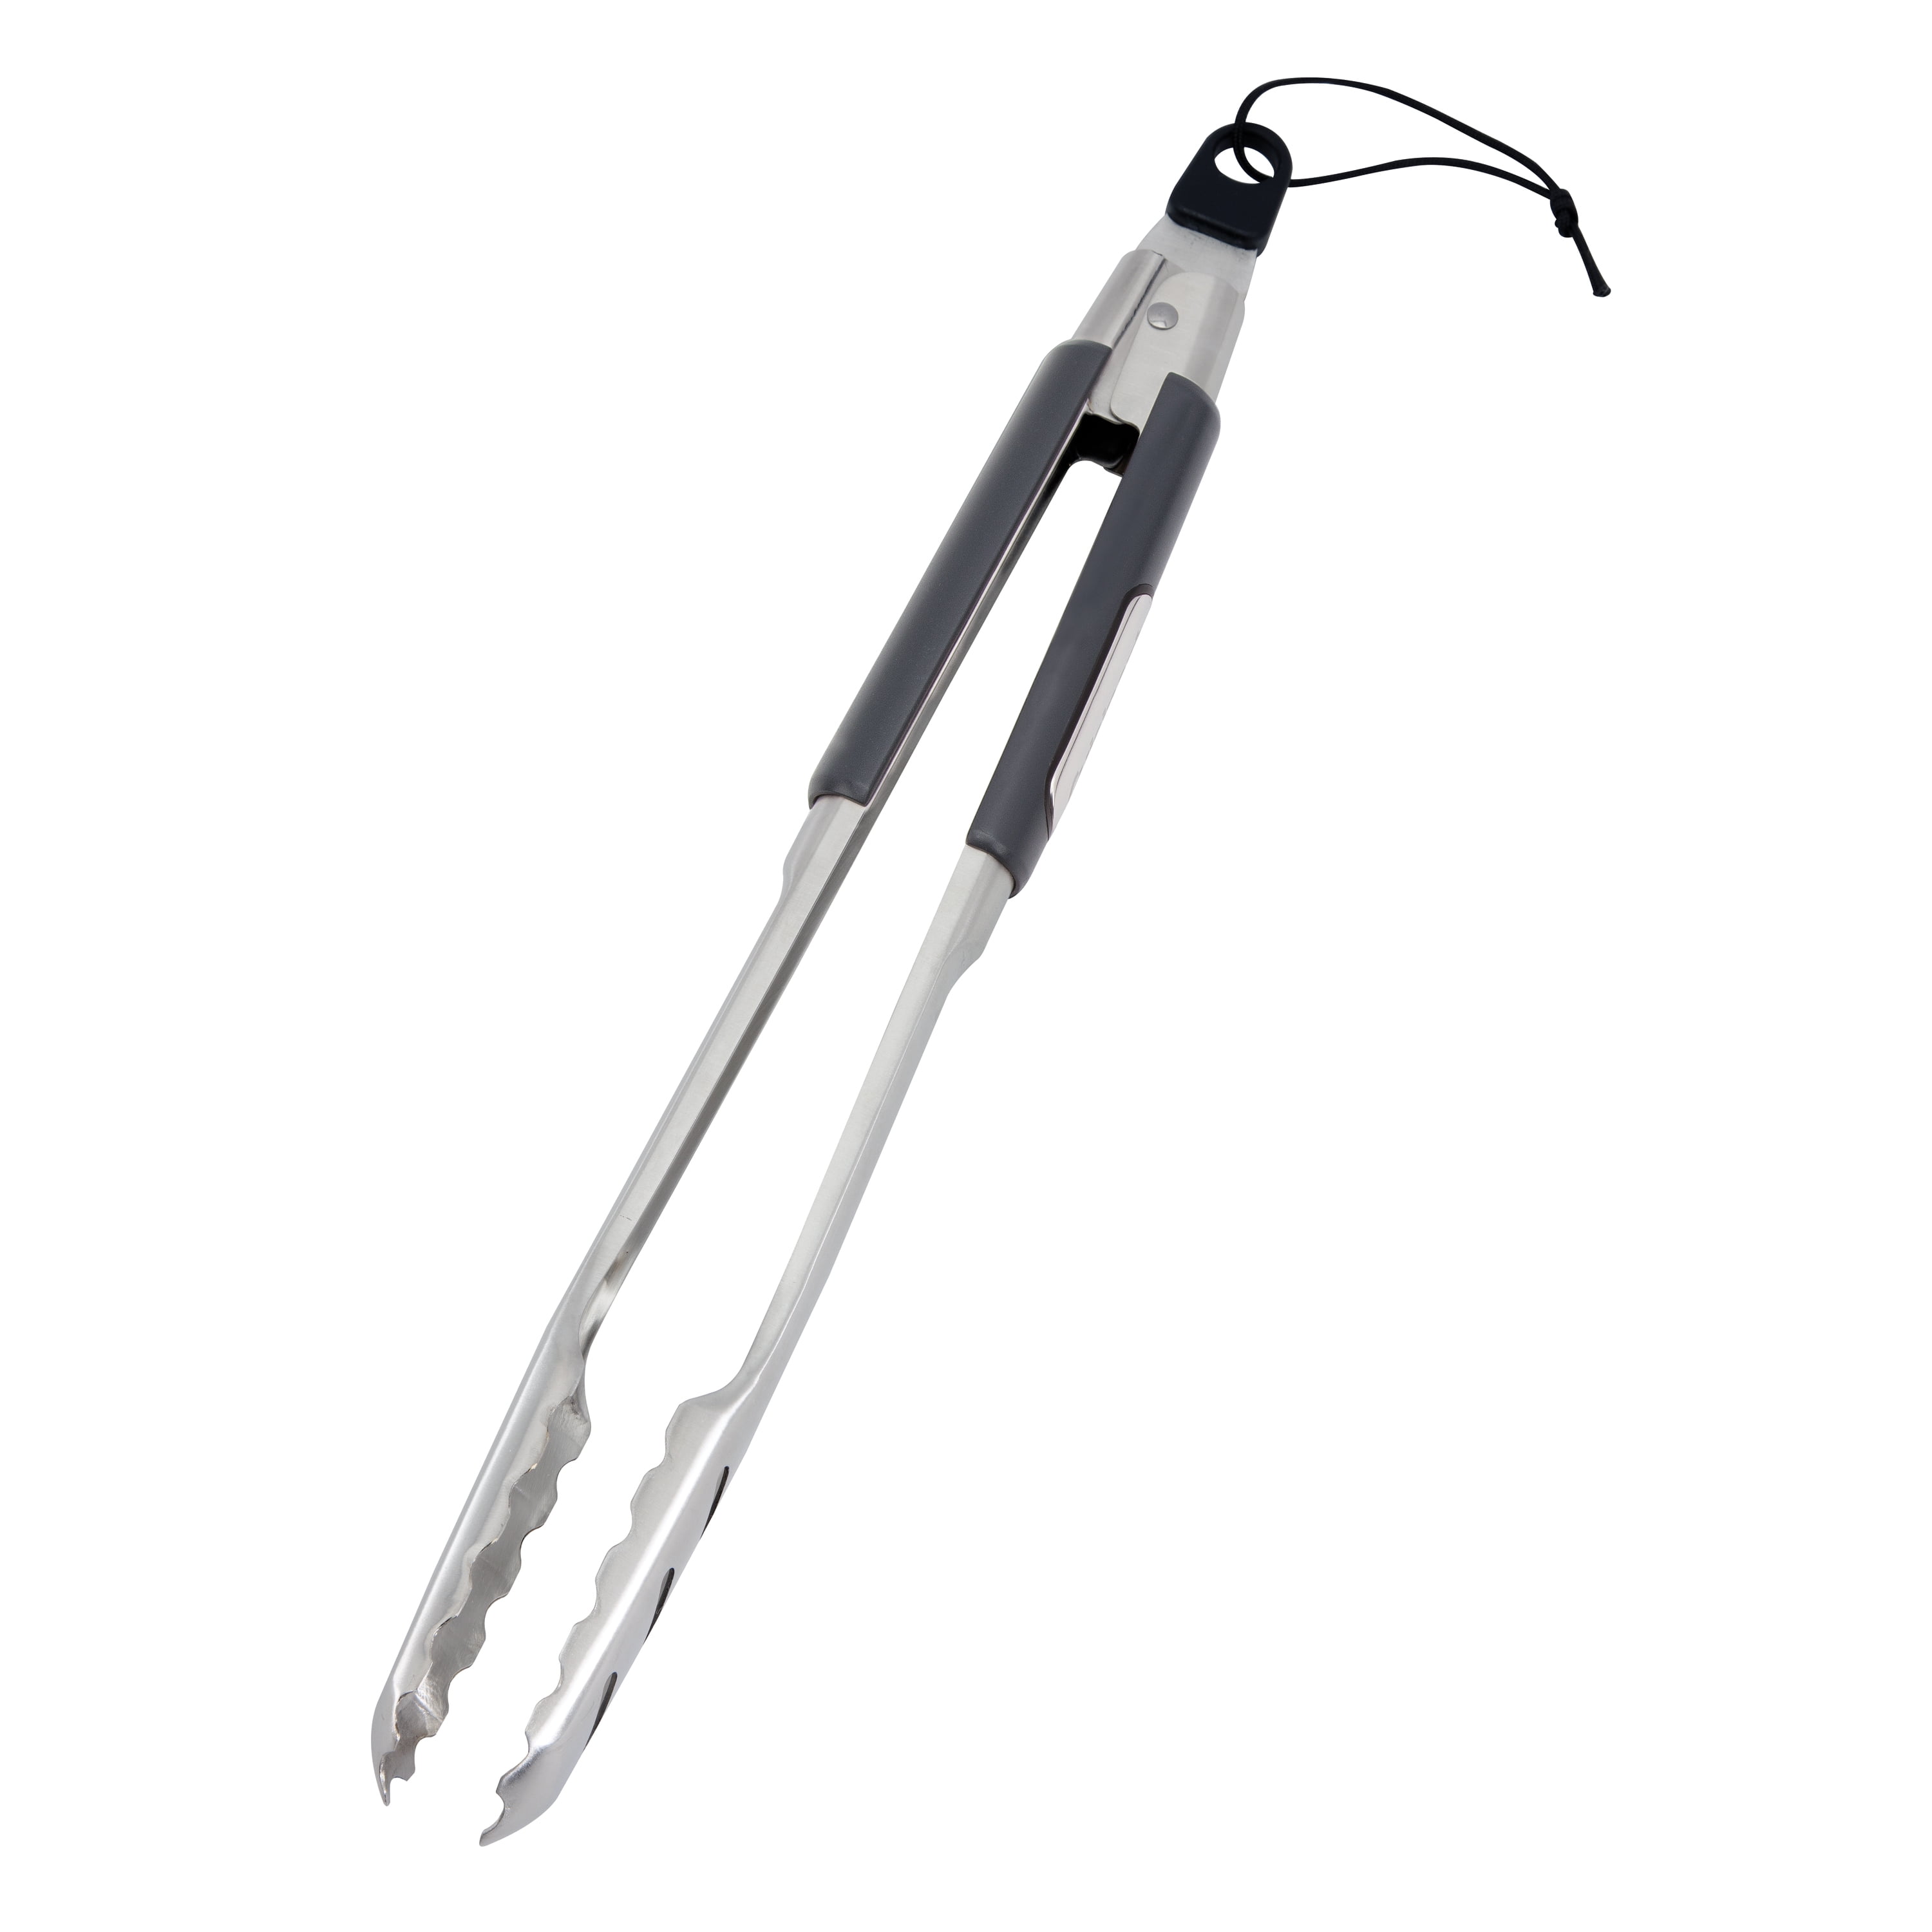 Cuisinart® CIT-100 Silicone Tipped Locking Grill Tongs, 15.25-Inch